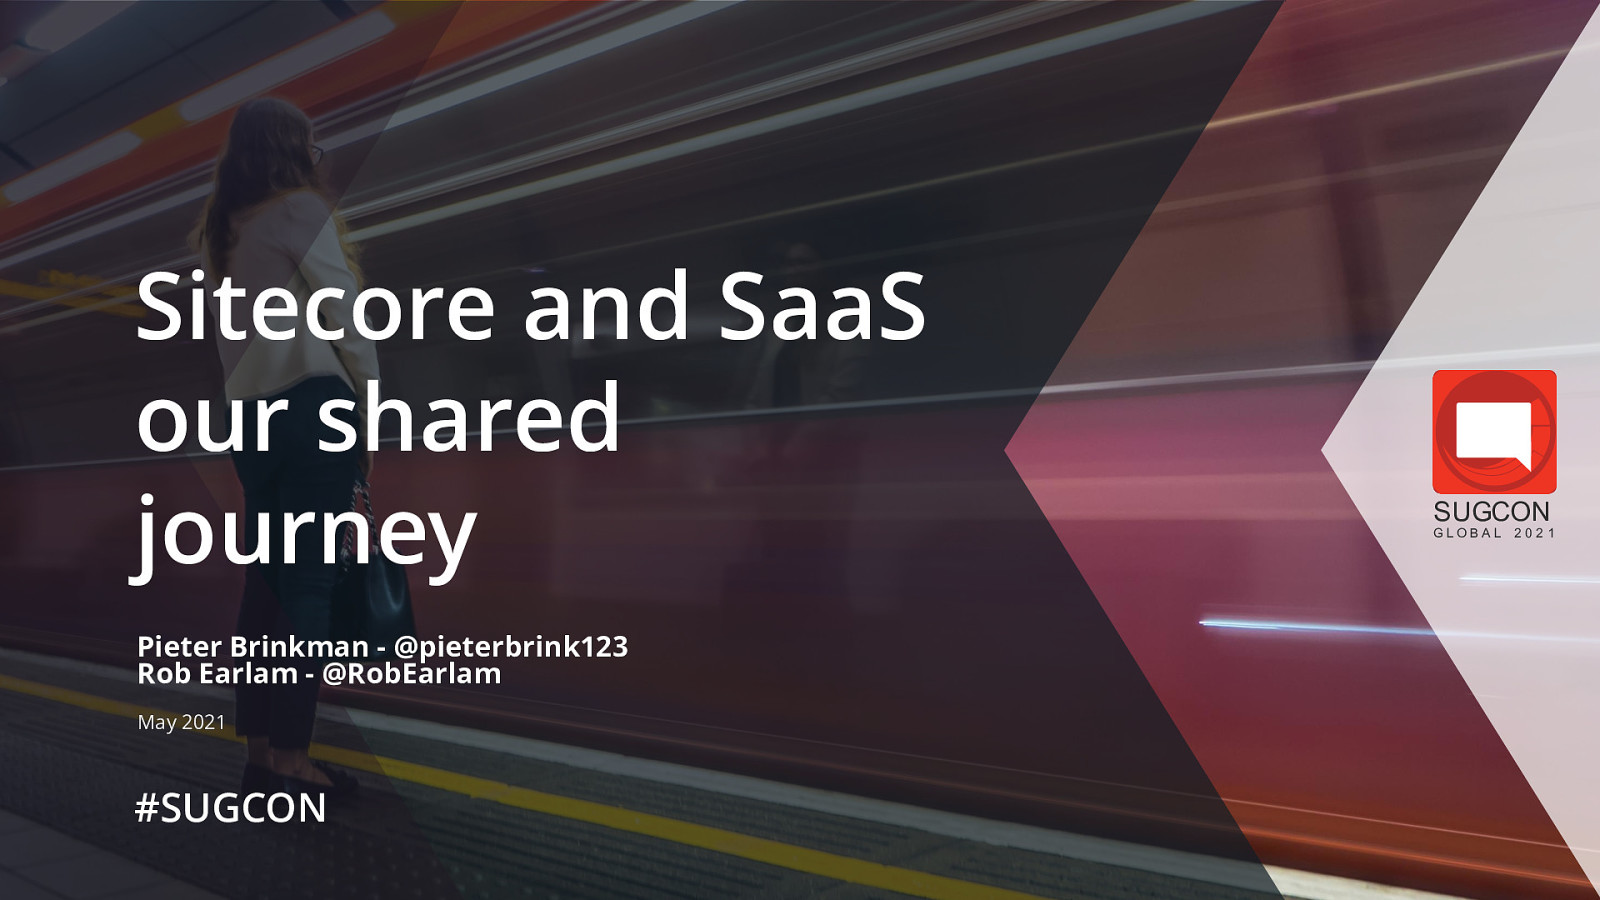 Sitecore and SaaS our shared journey